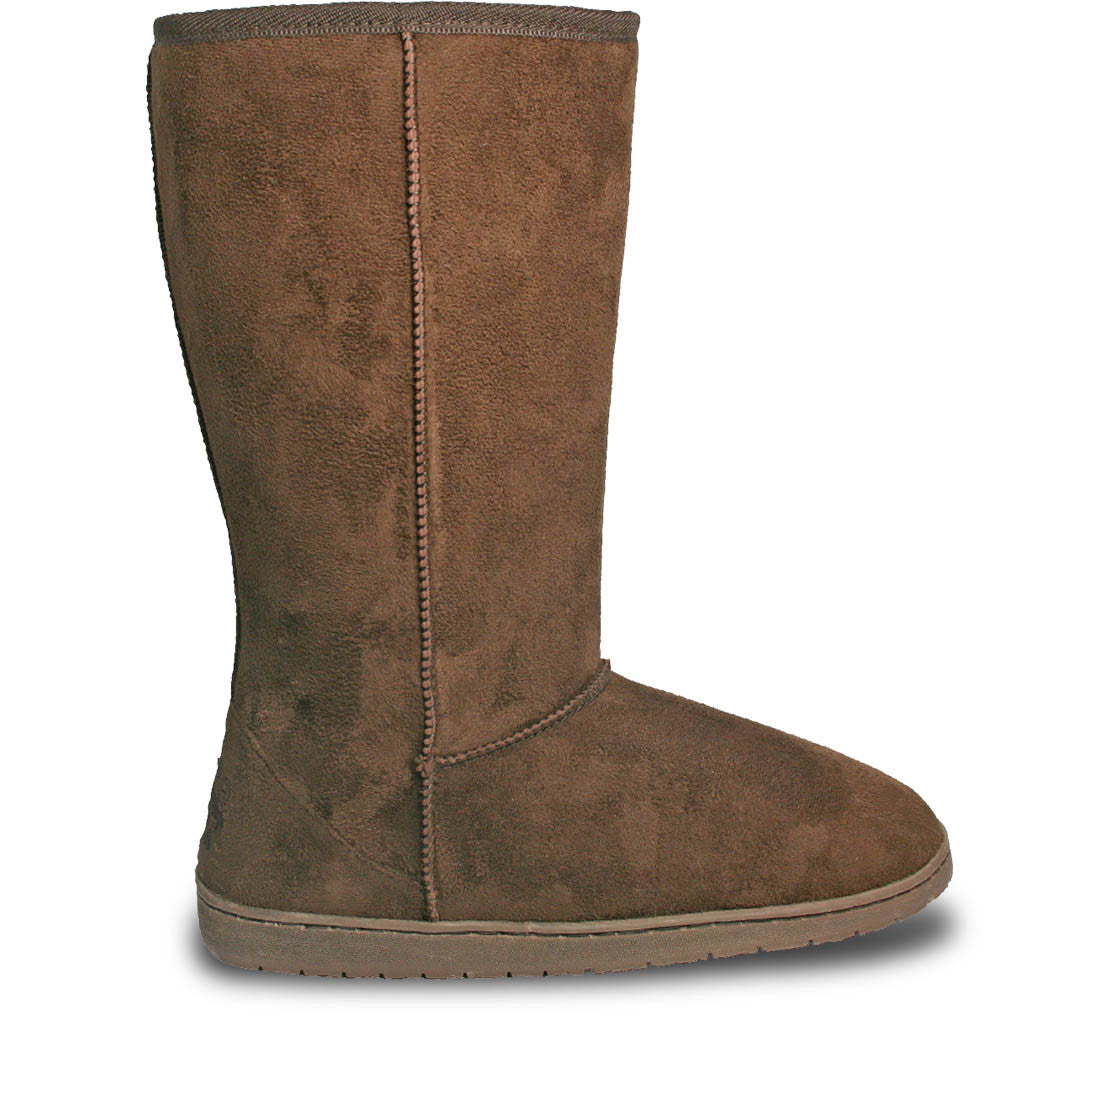 Image of Women's 13-inch Microfiber Boots - Chocolate